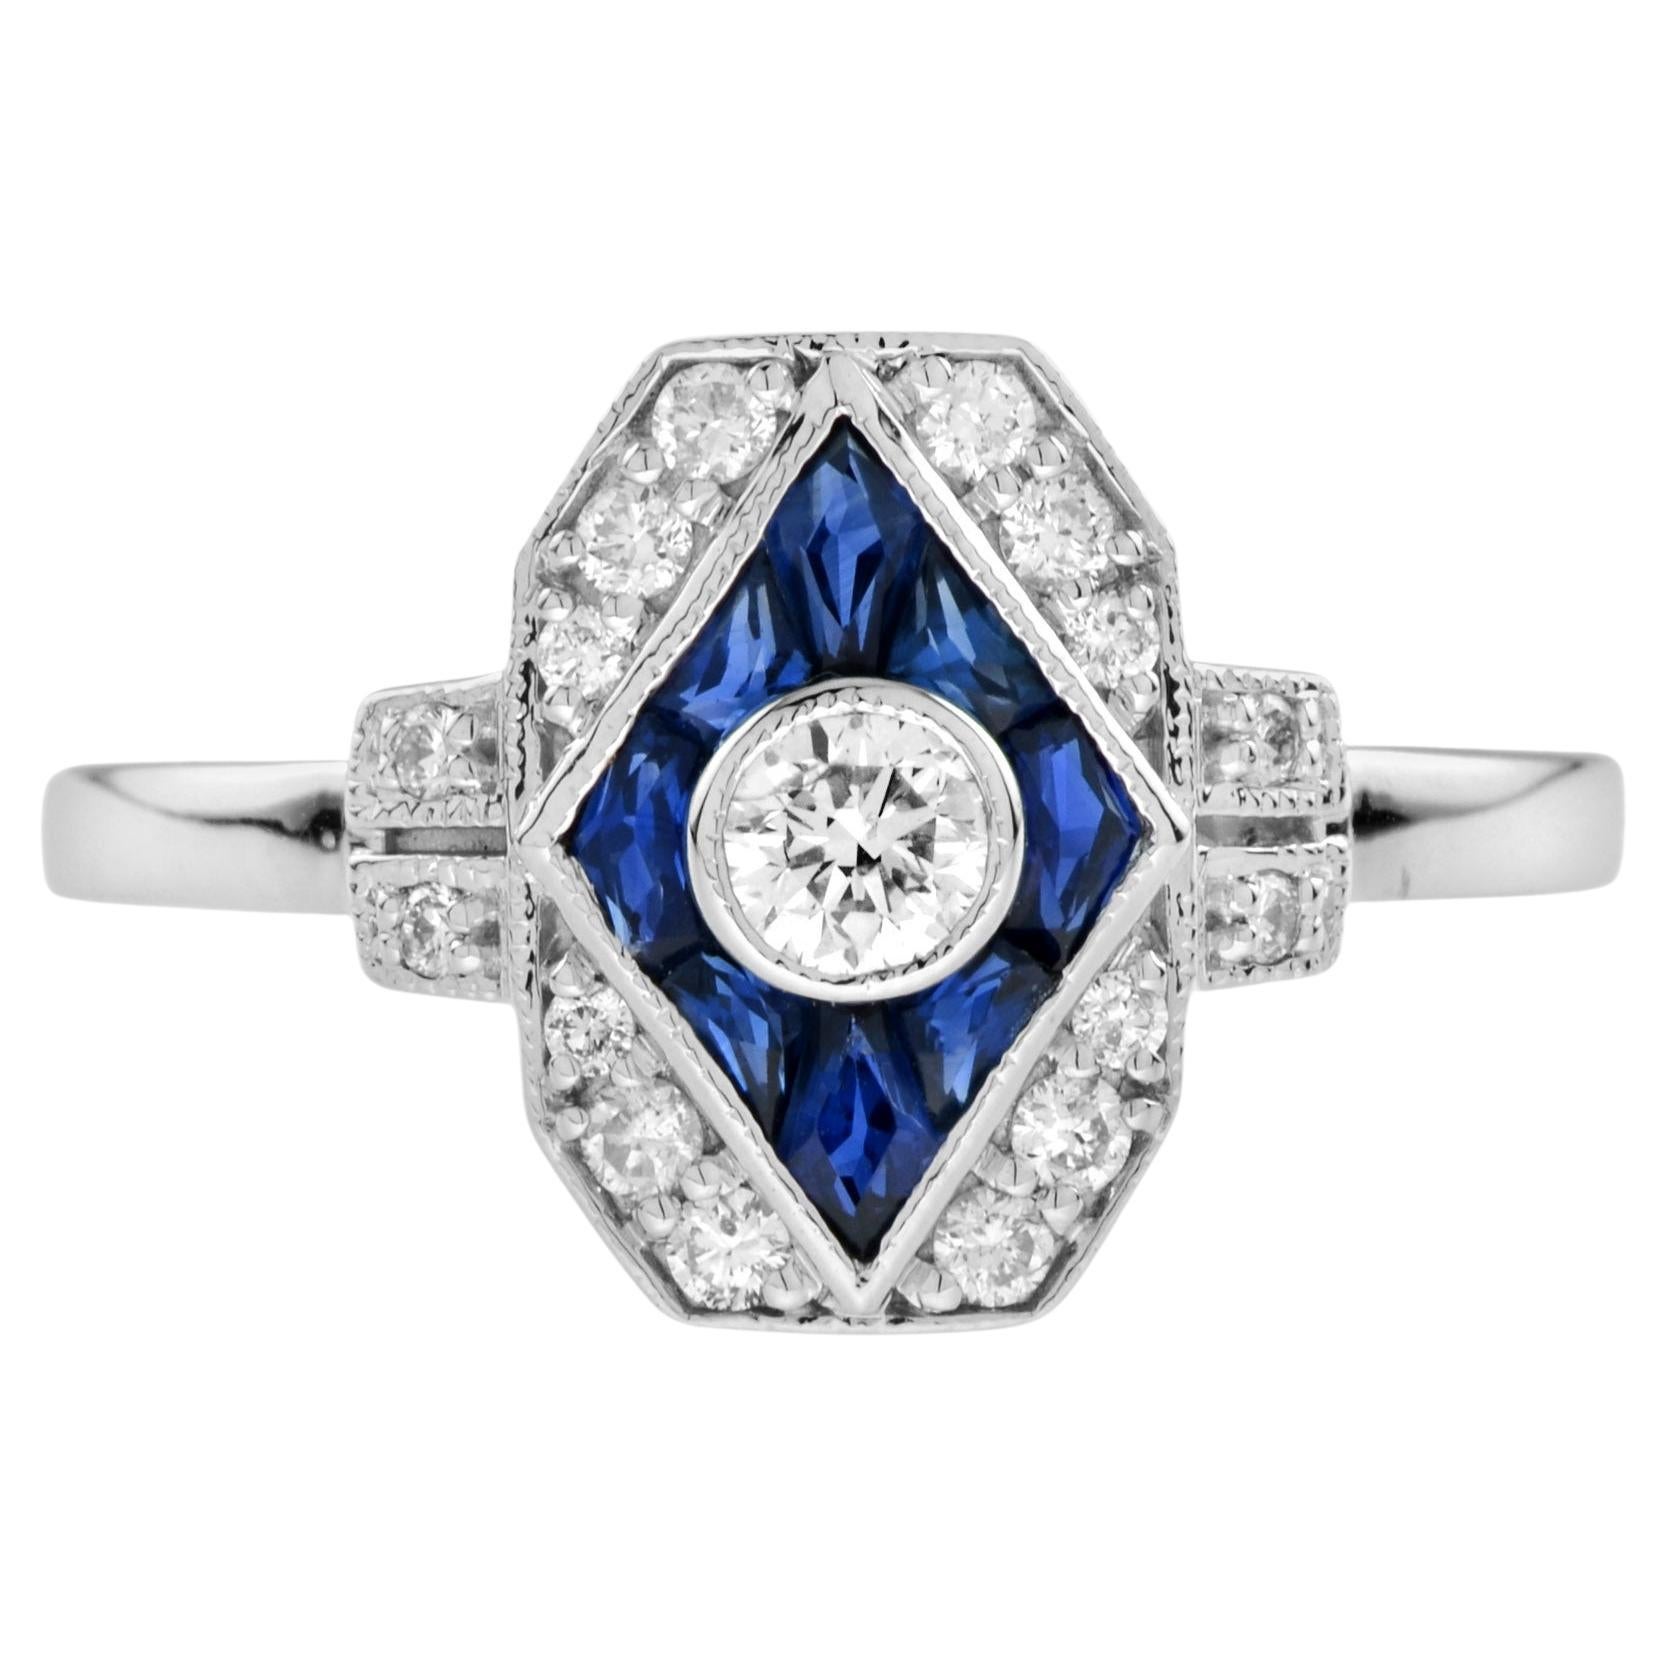 Diamond and Blue Sapphire Art Deco Style Engagement Ring in 14k White Gold